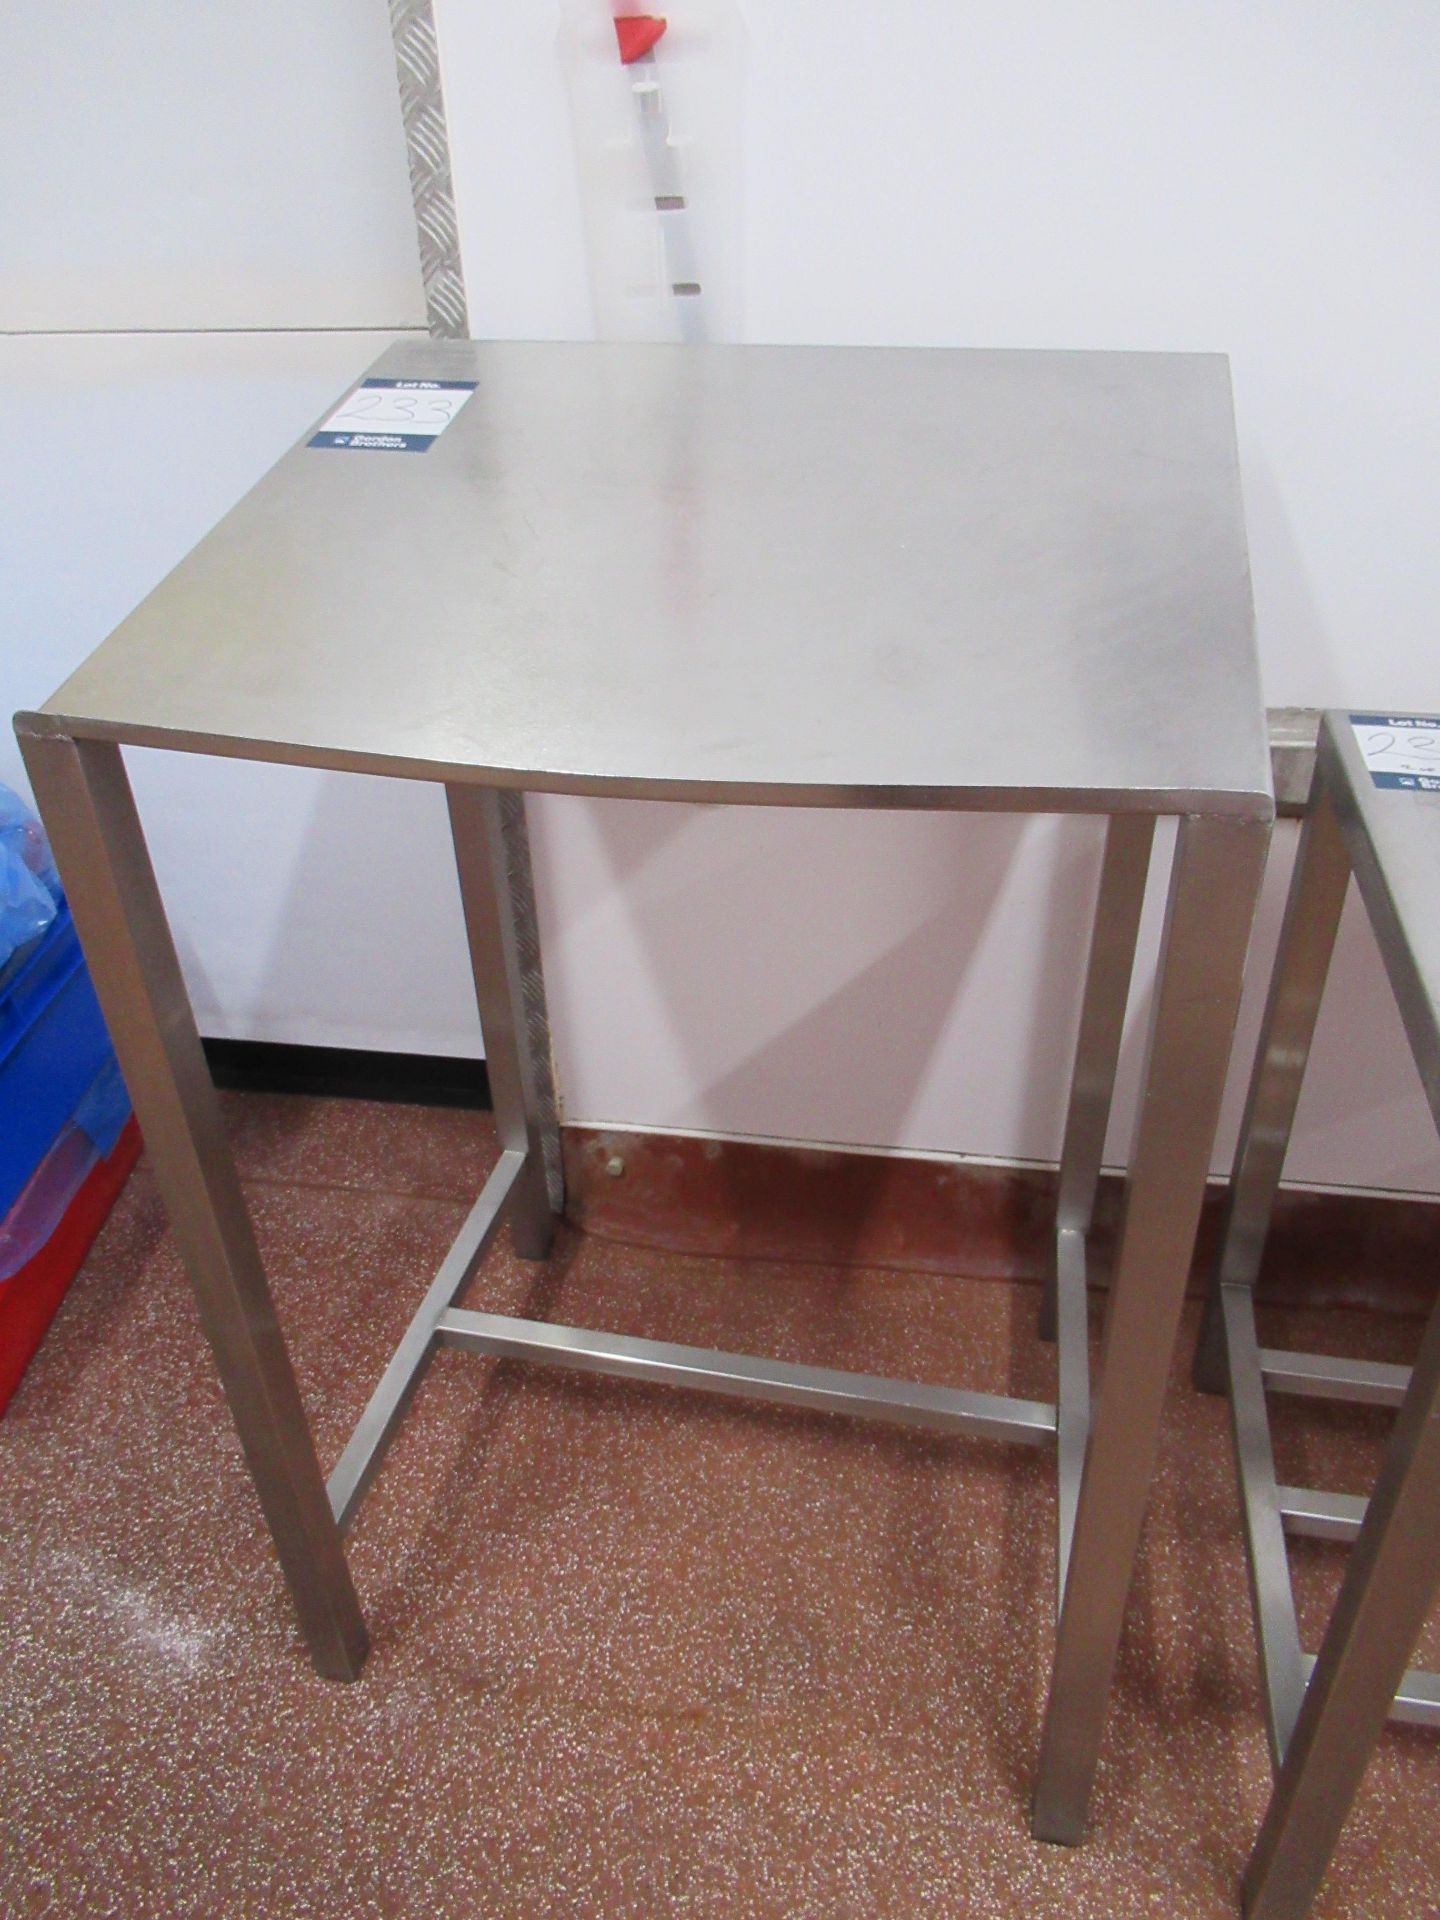 Teknomek Hygienox stainless steel desk 700 x 610 top and 1000mm height to top